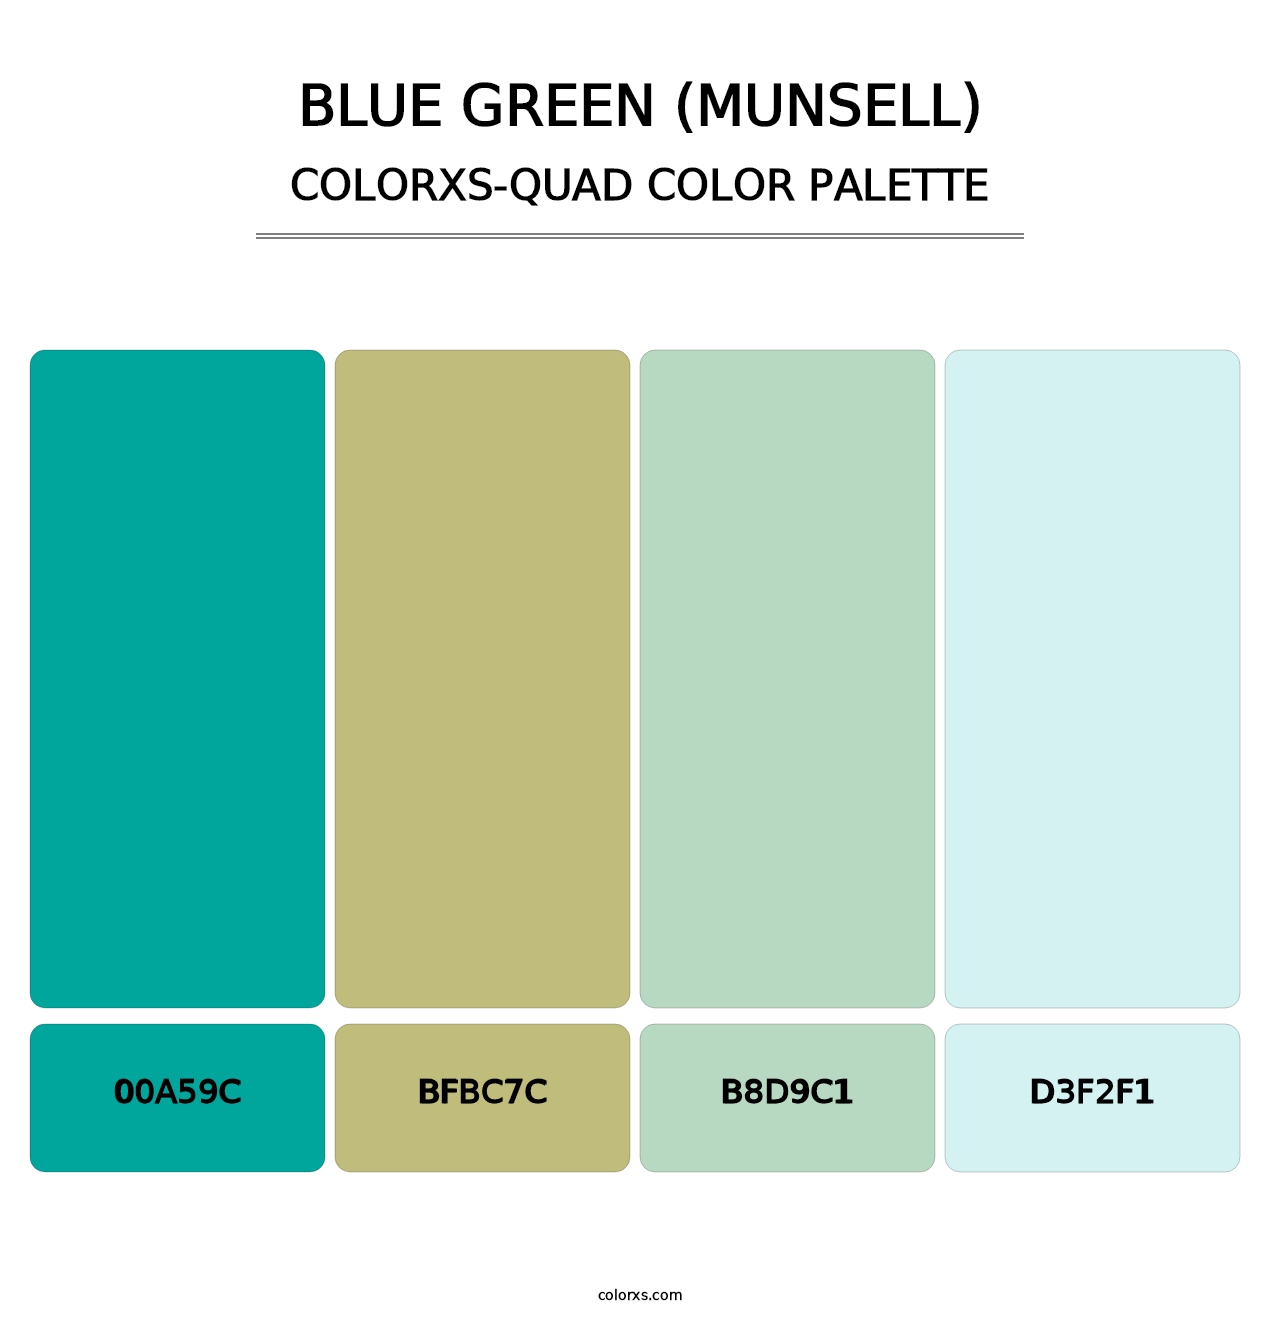 Blue Green (Munsell) - Colorxs Quad Palette